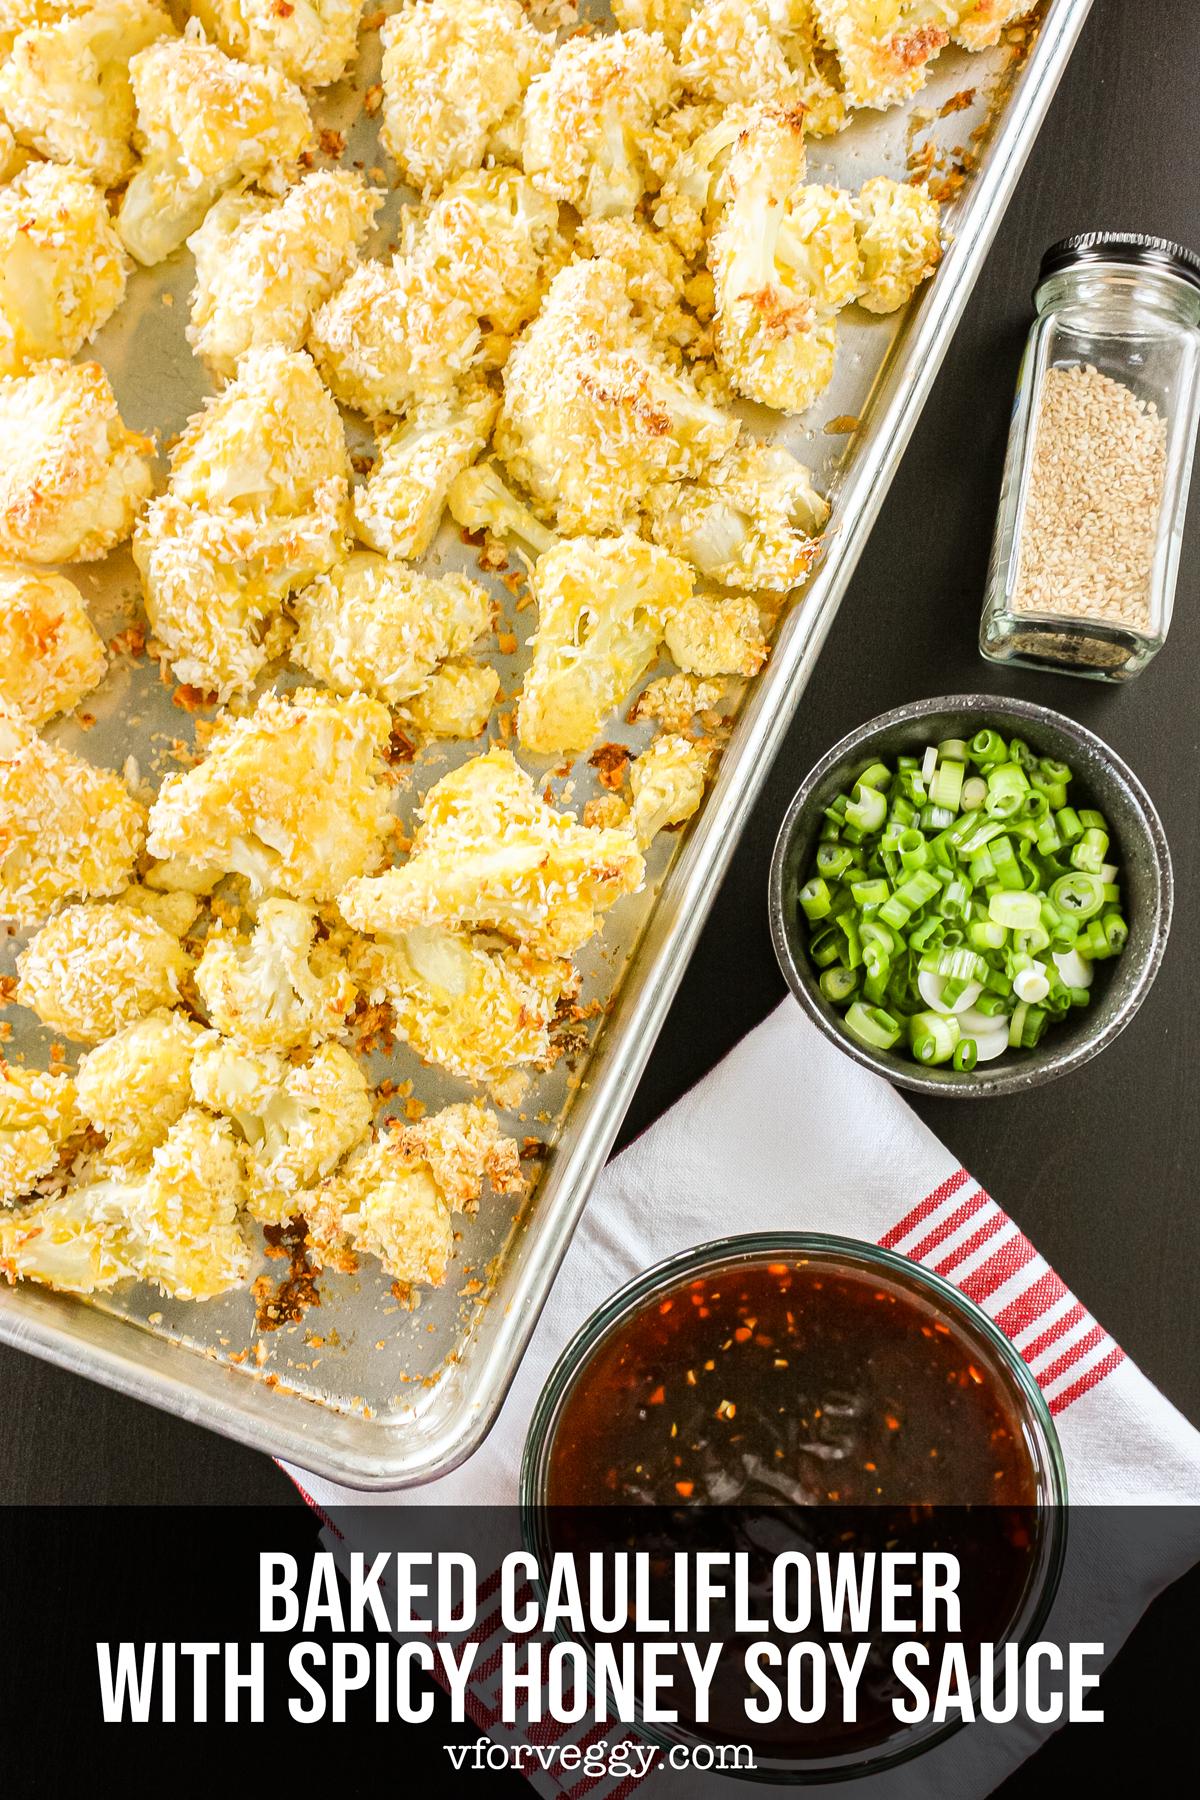 Baked Cauliflower with Spicy Honey Soy Sauce